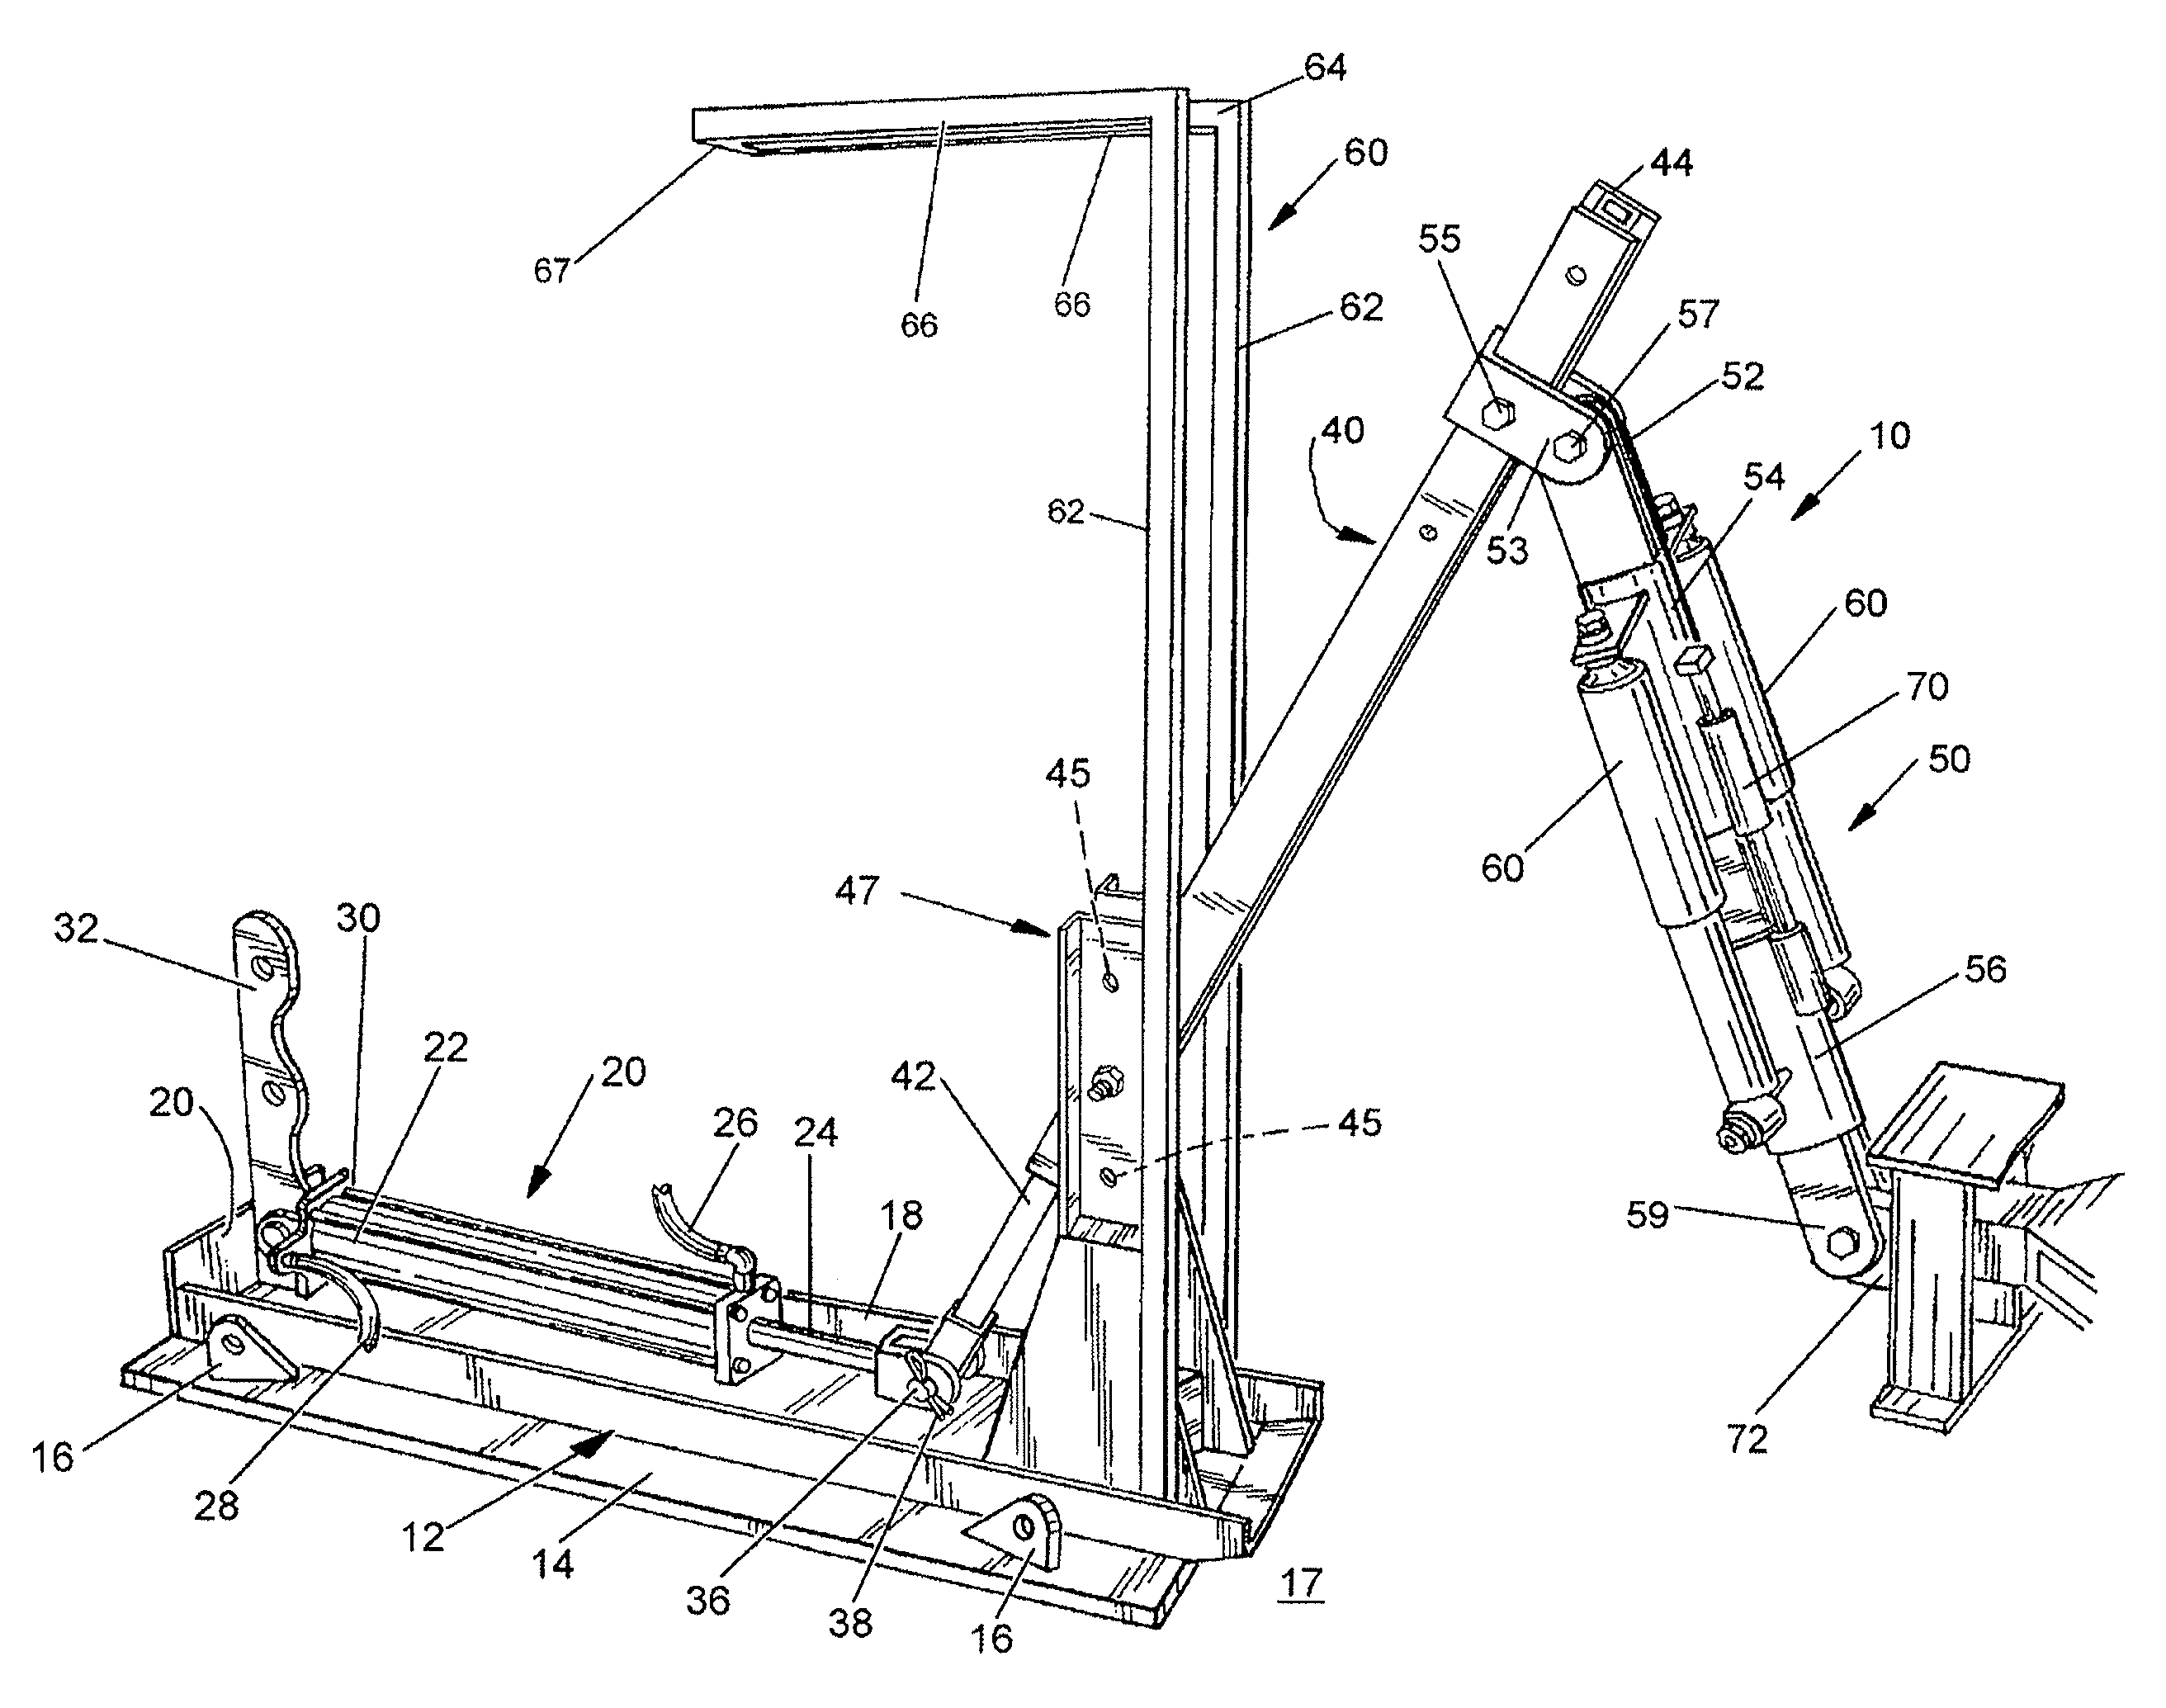 Tong positioning and alignment device